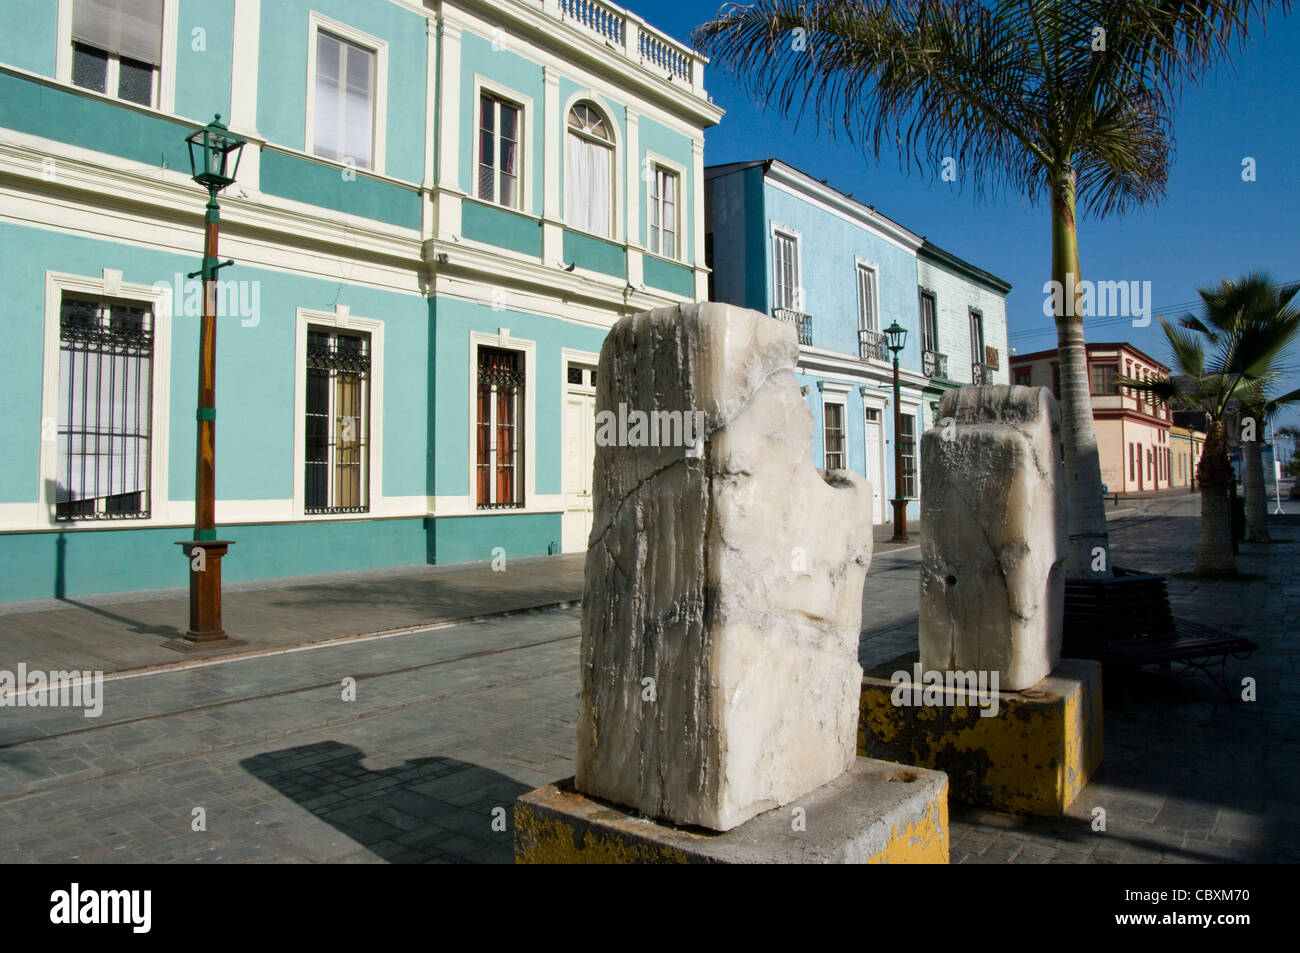 Chile. Iquique city. Baquedano street. Traditional houses. Stock Photo